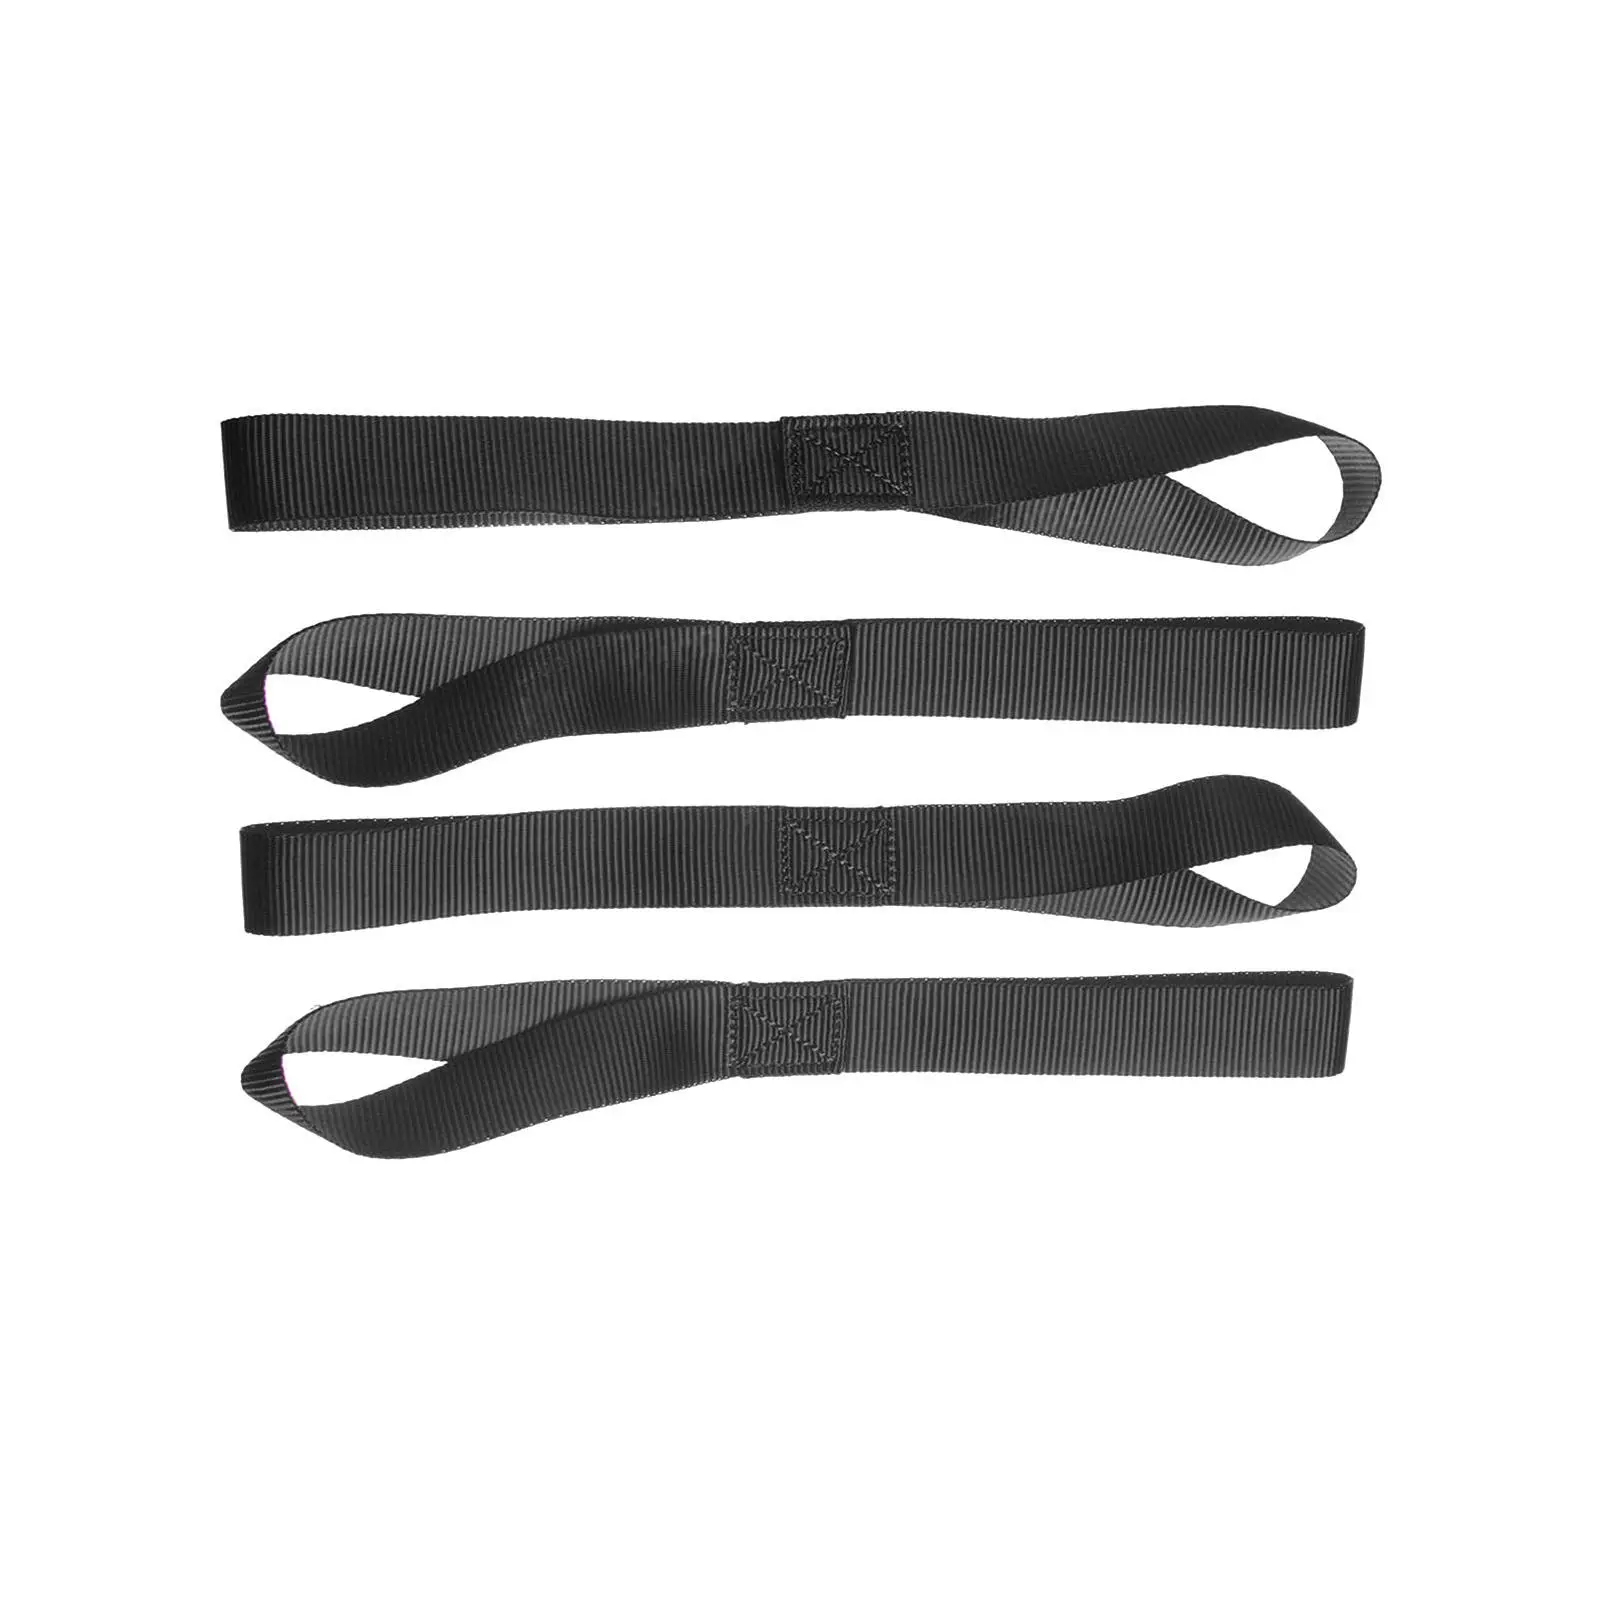 5 Pieces Soft Loop Nylon Vehicle Moving ATV UTV Lawn Equipment Multiple Use Owing Cargo Tie Downs Motorcycle Tie-down Straps